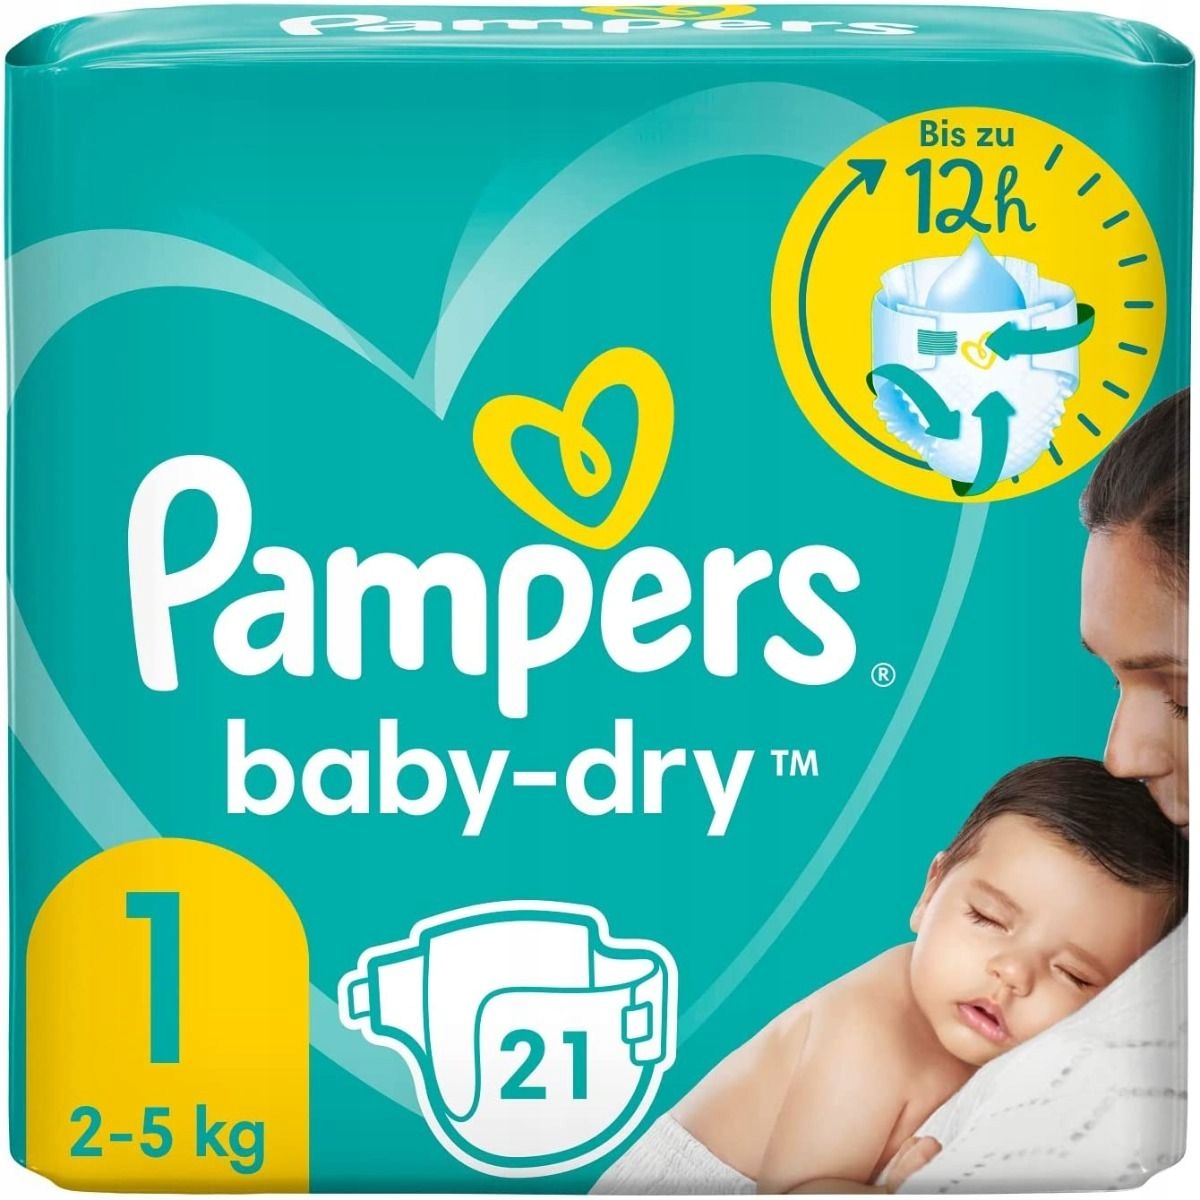 alcampo pampers